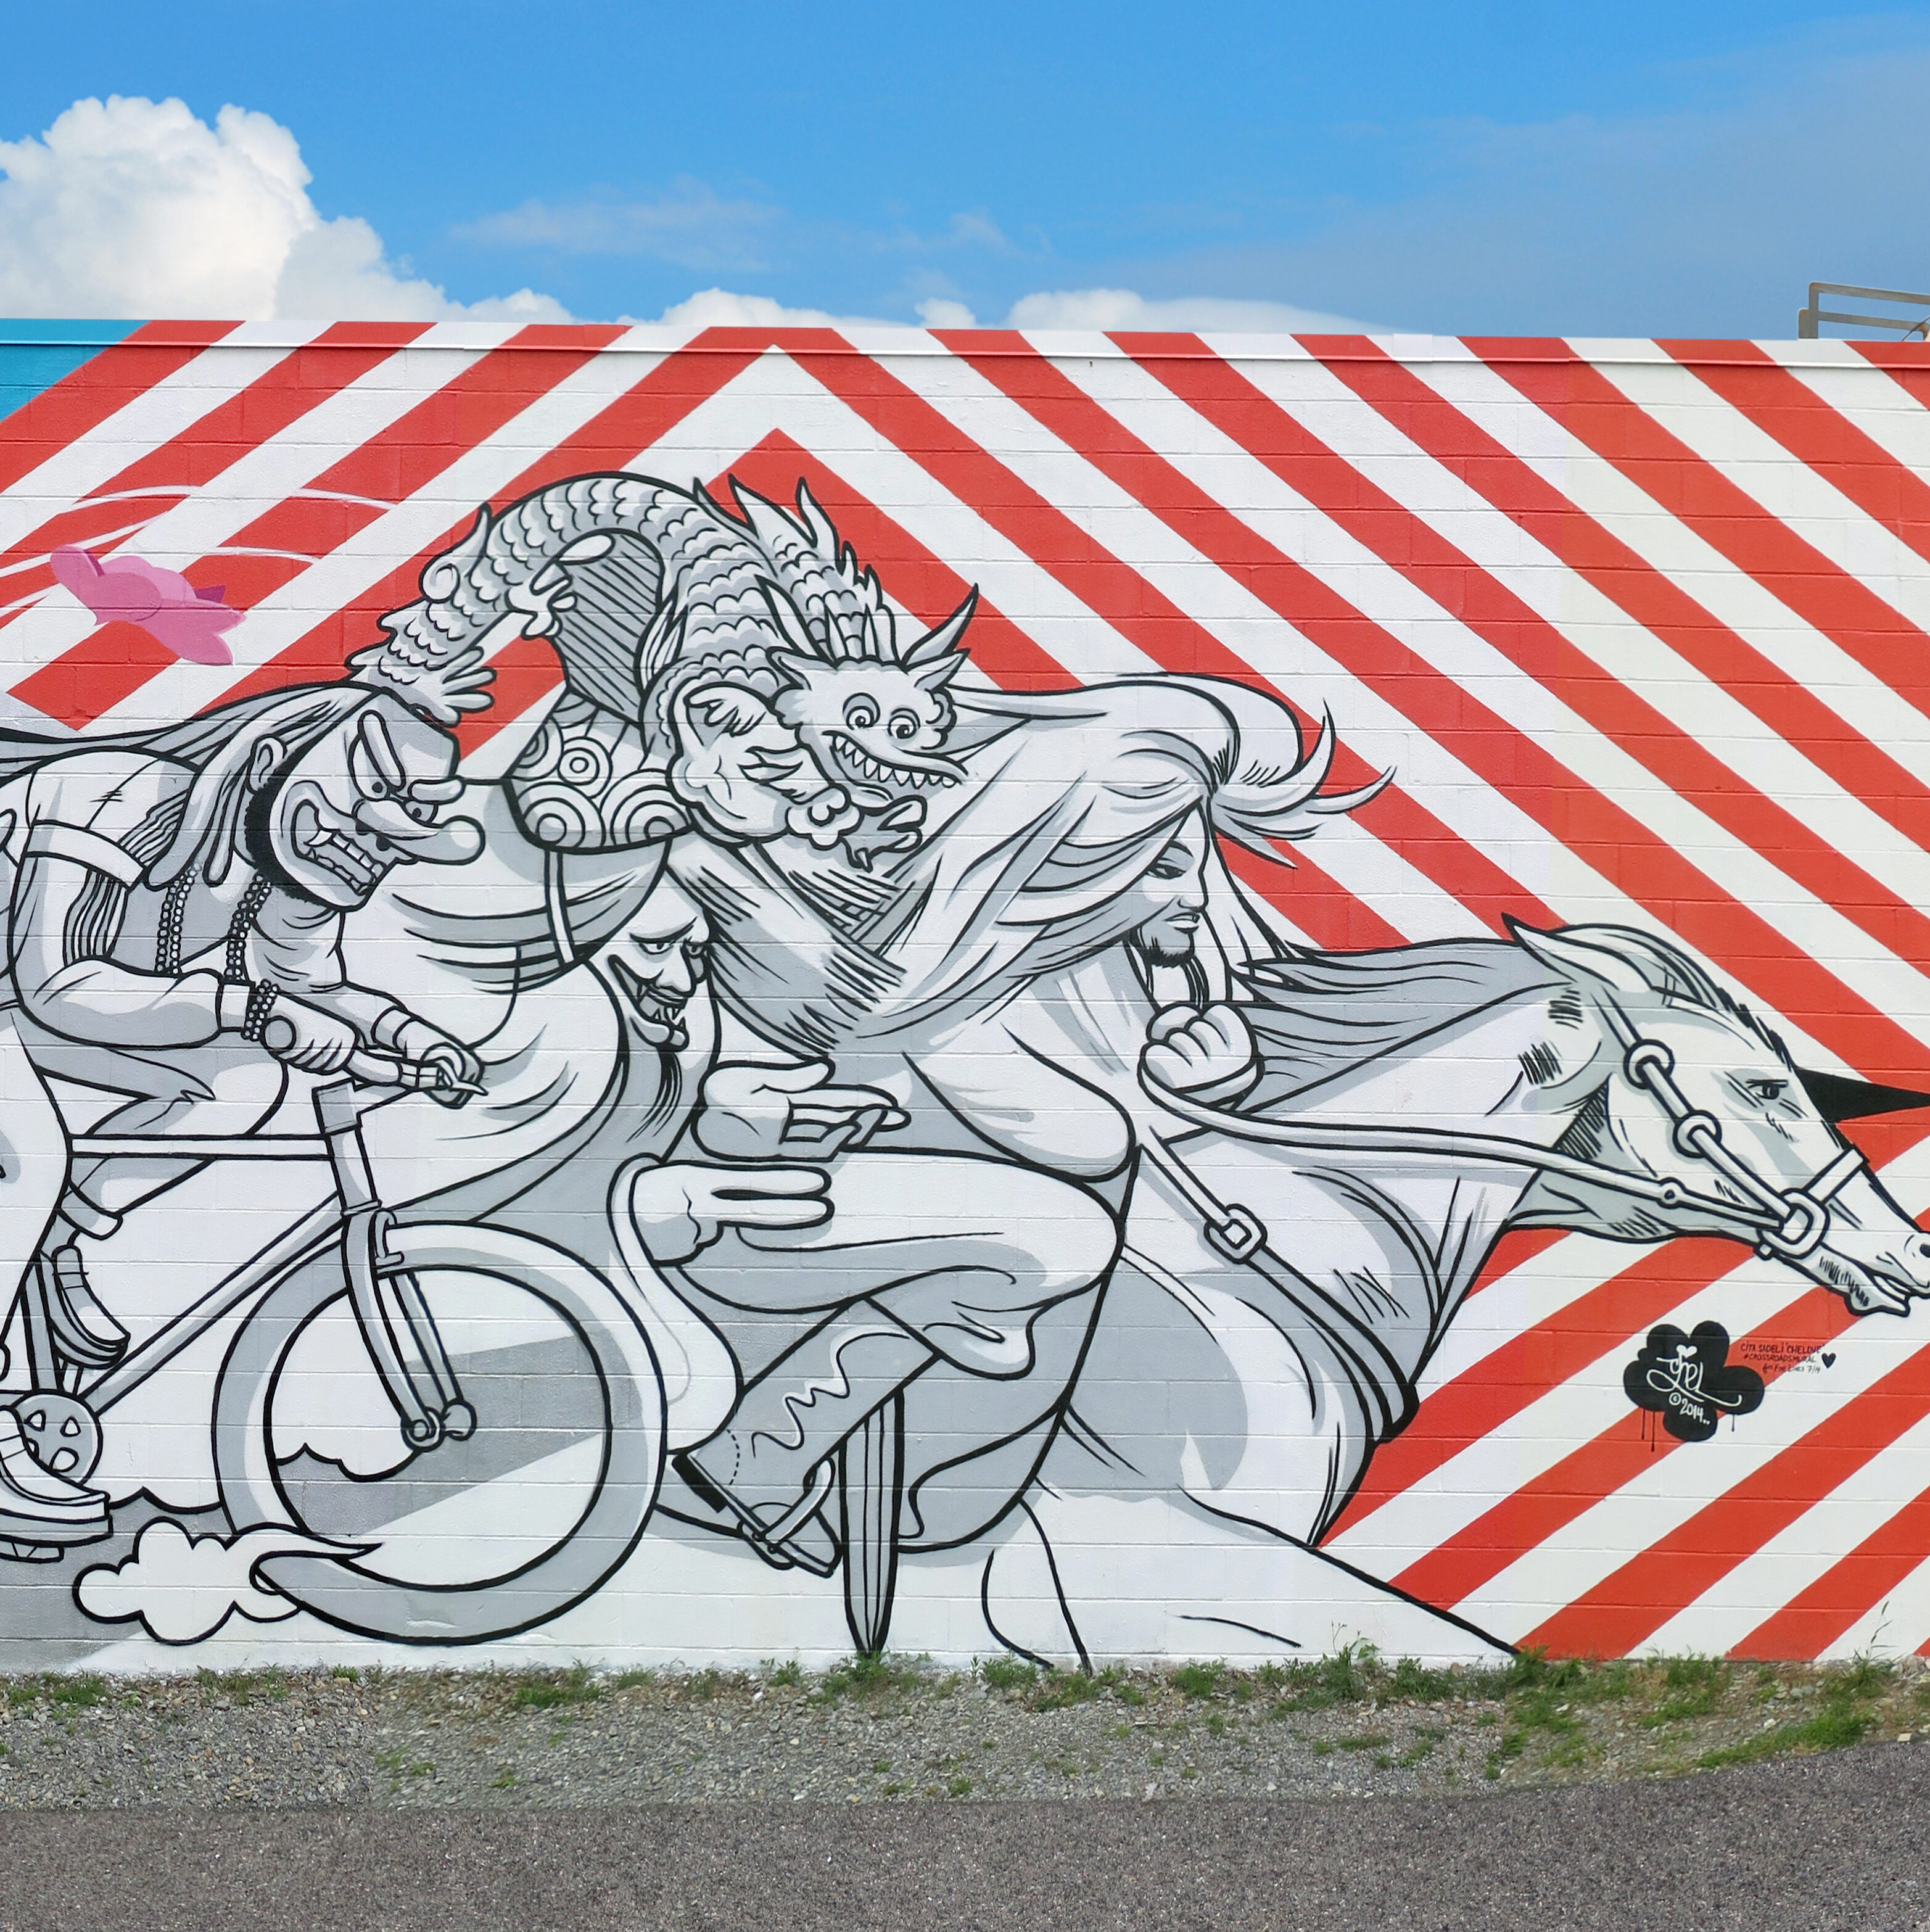 Several black-and-white figures wear masks and ride bicycles, led by a figure on horseback. The background features red and white stripes, blue, and pink flowers.